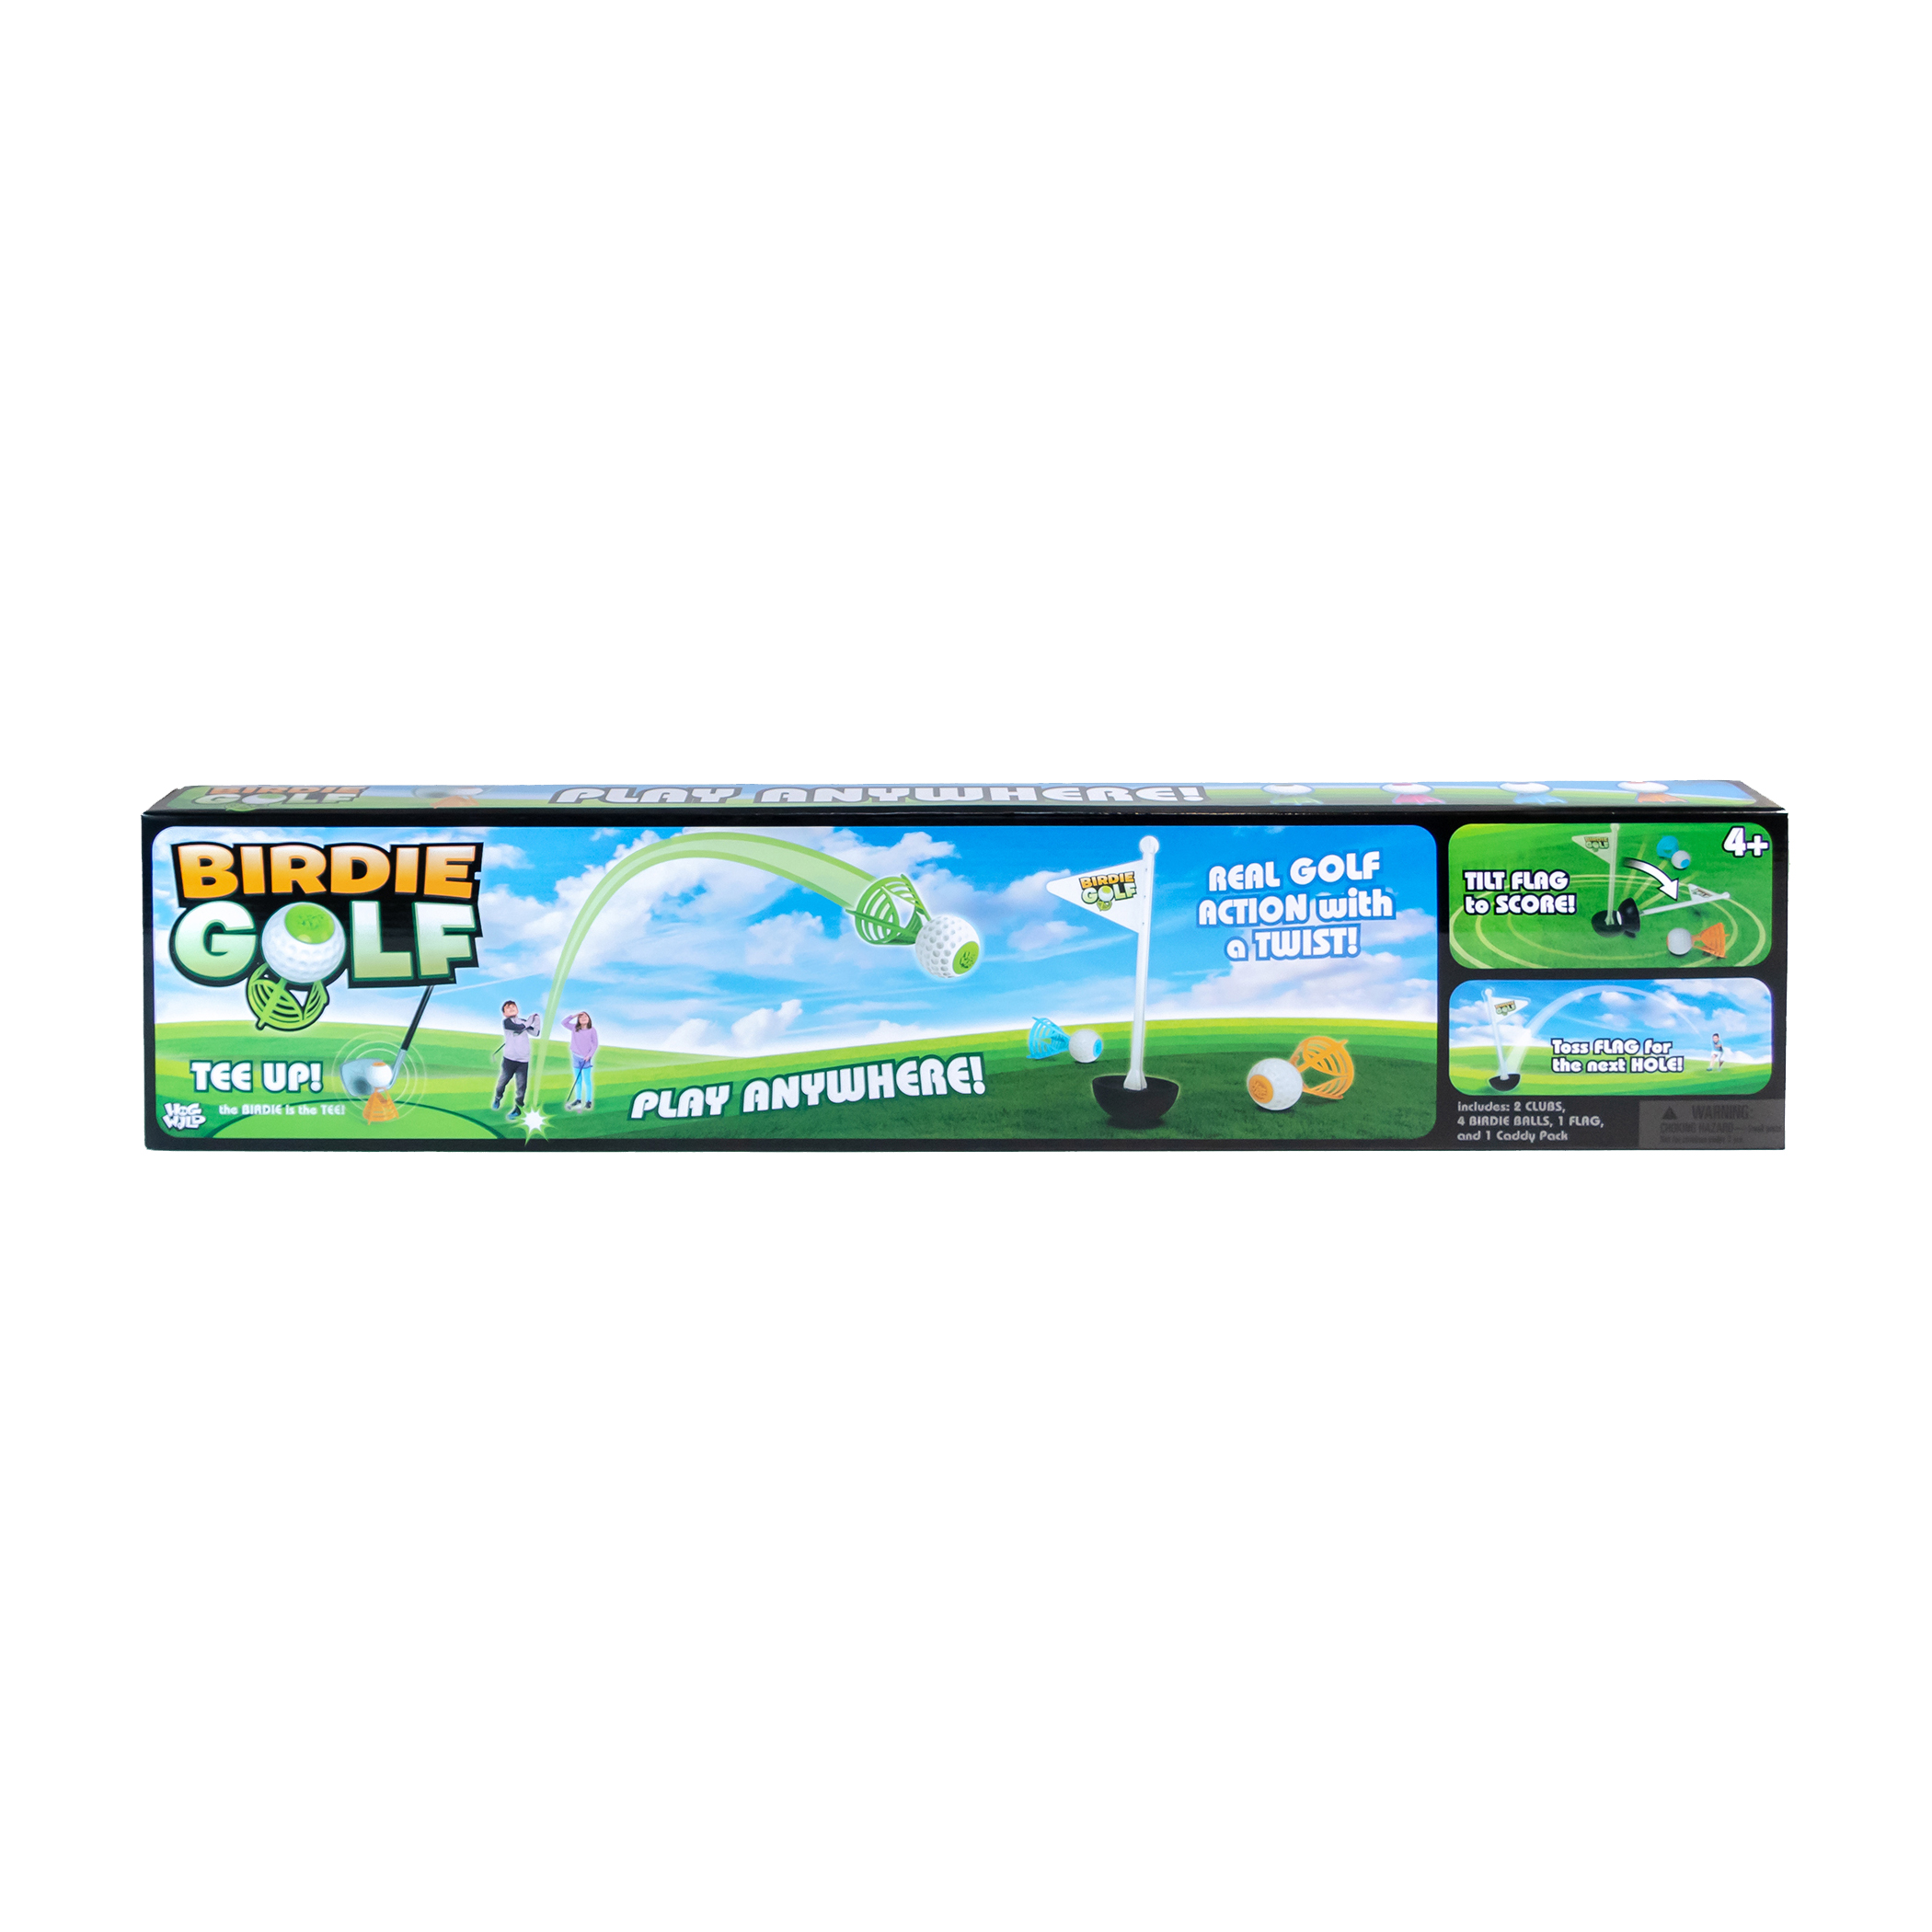 hog wild - birdie golf - outdoor game for family fun in the backyard, at the beach, on the lawn - active play for kids, adult